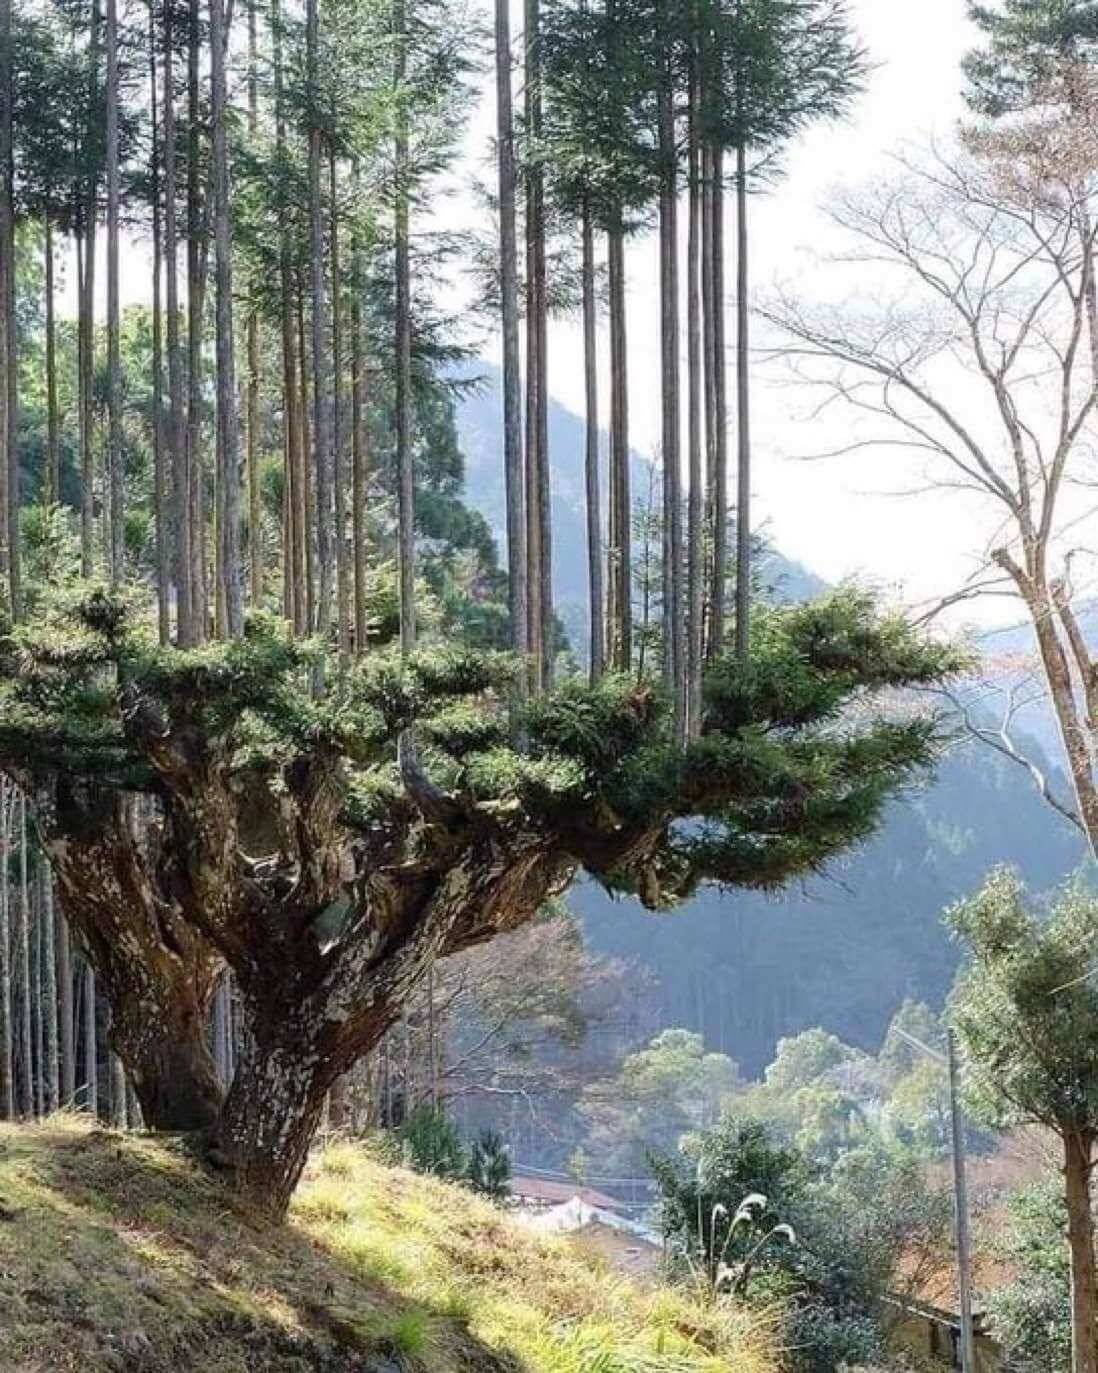 Do the Japanese Have The Answer To Deforestation?